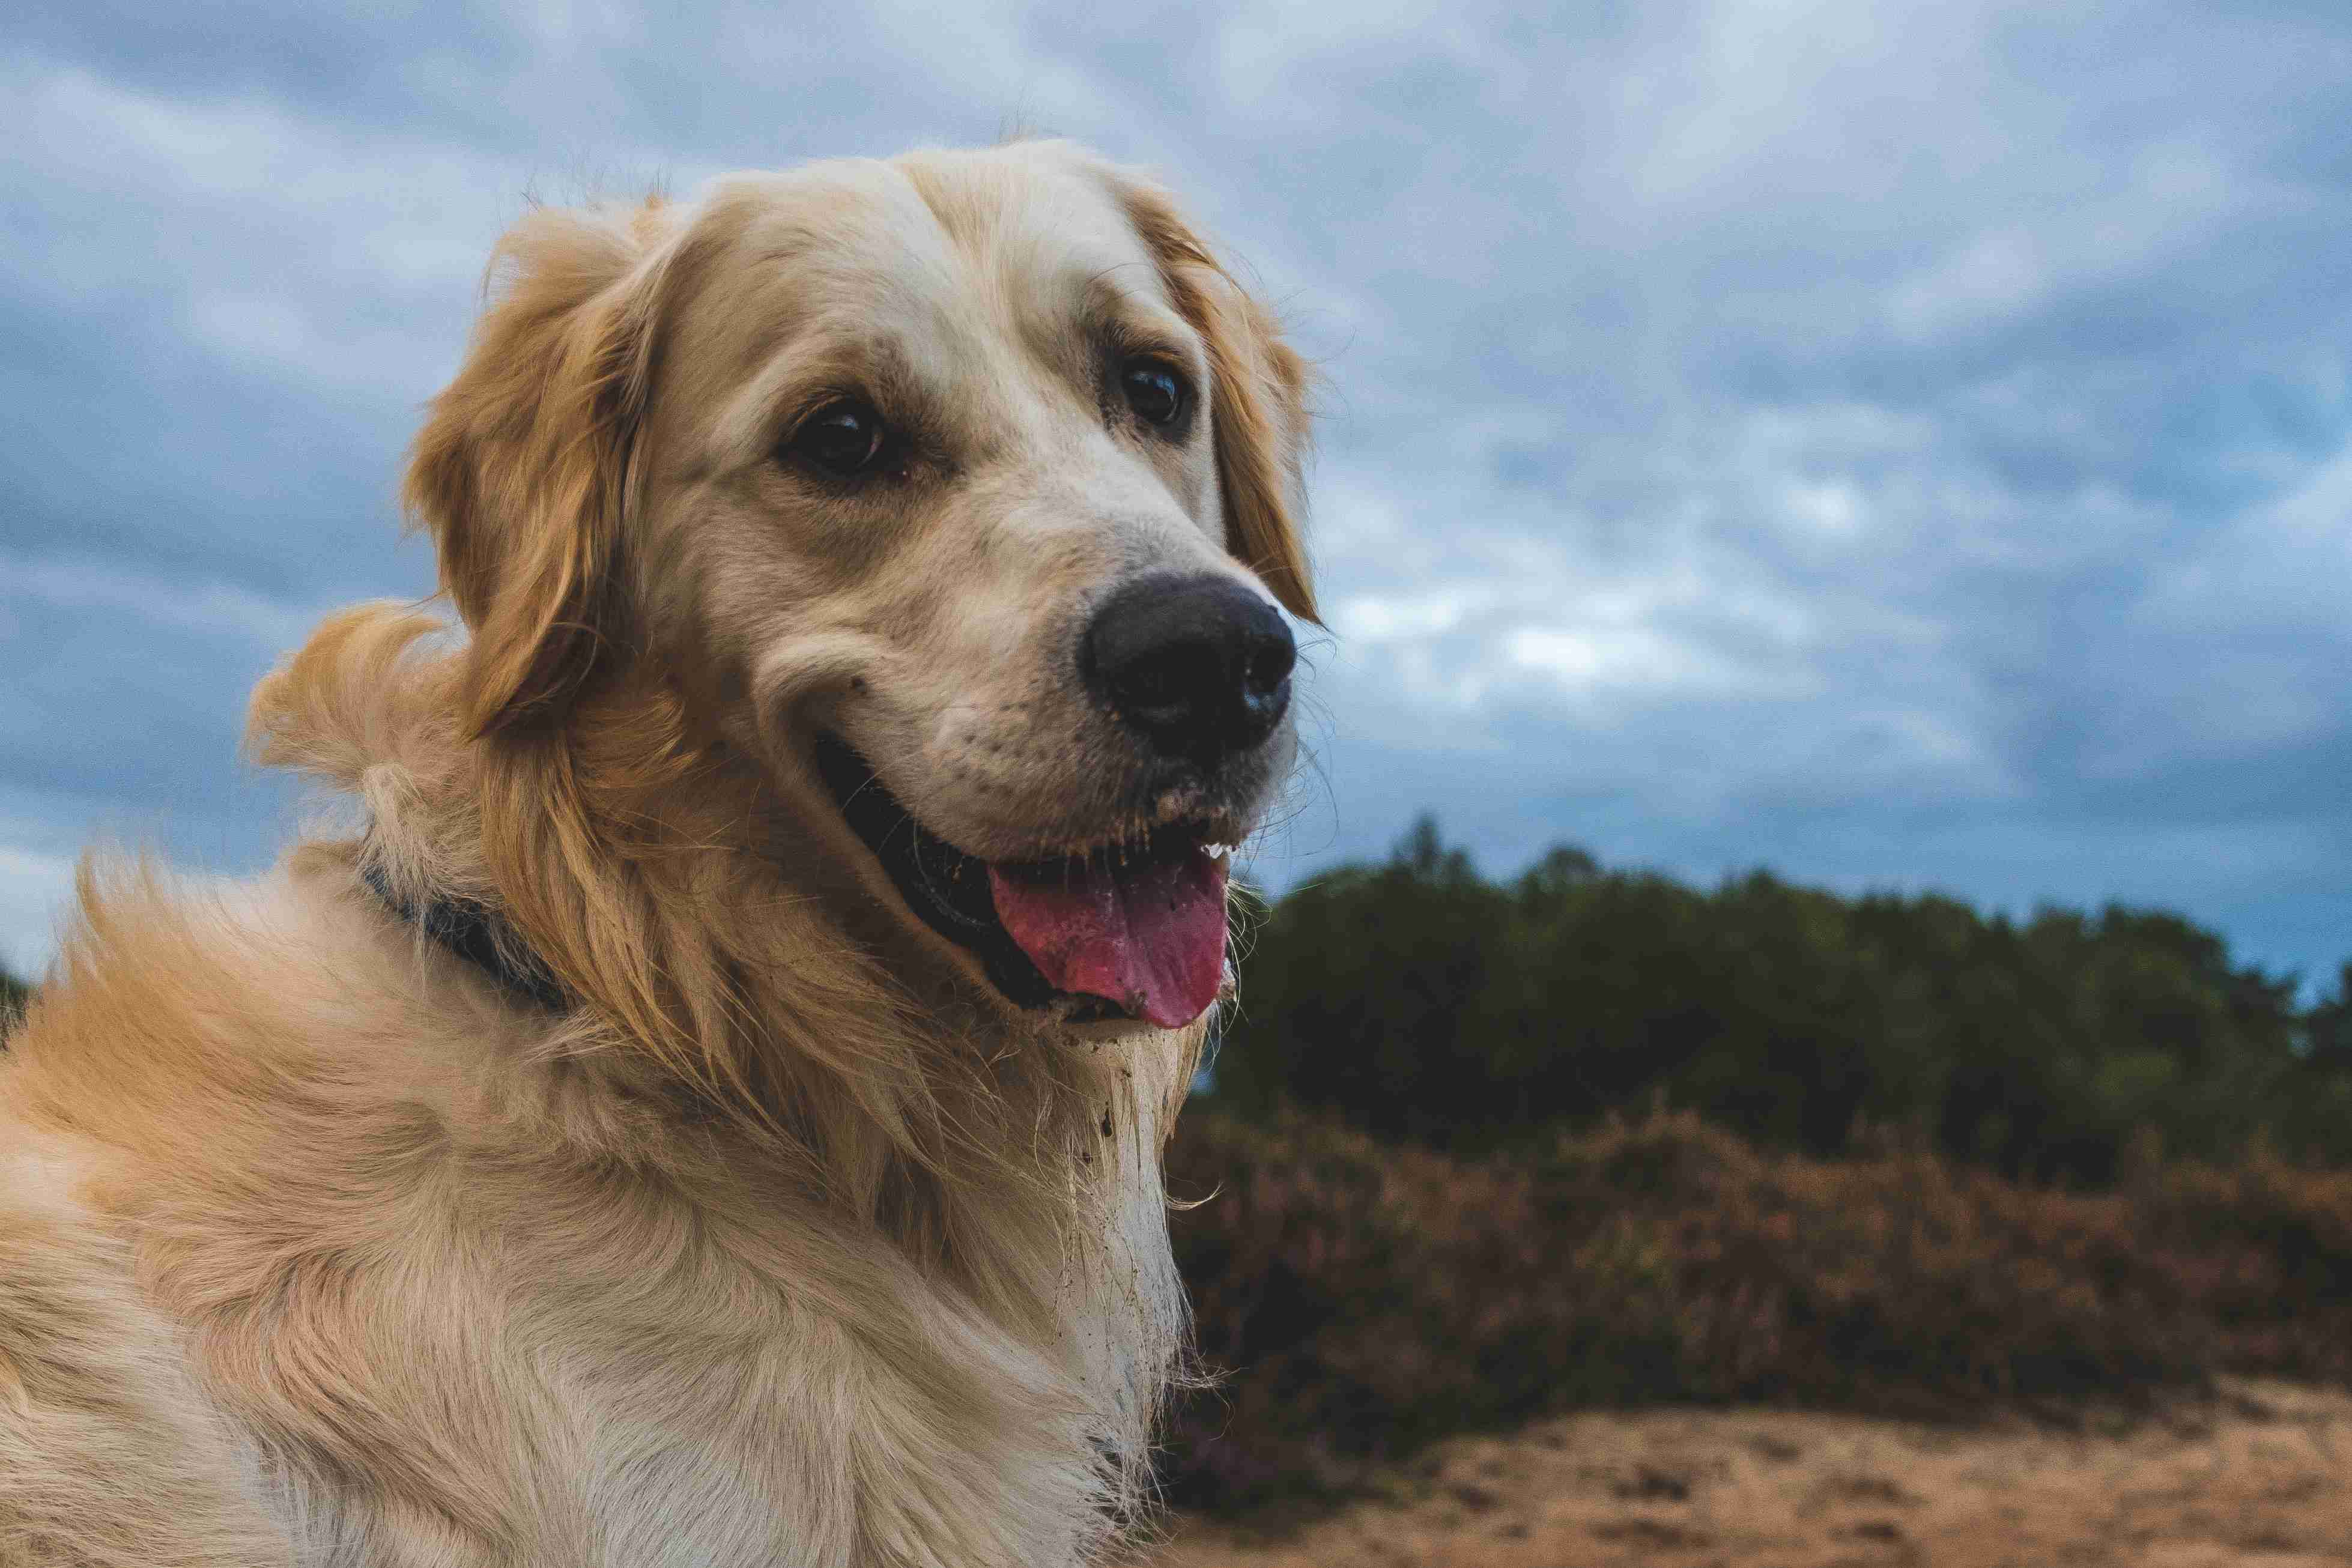 Are there any specific dental care products that are recommended for Golden Retrievers?